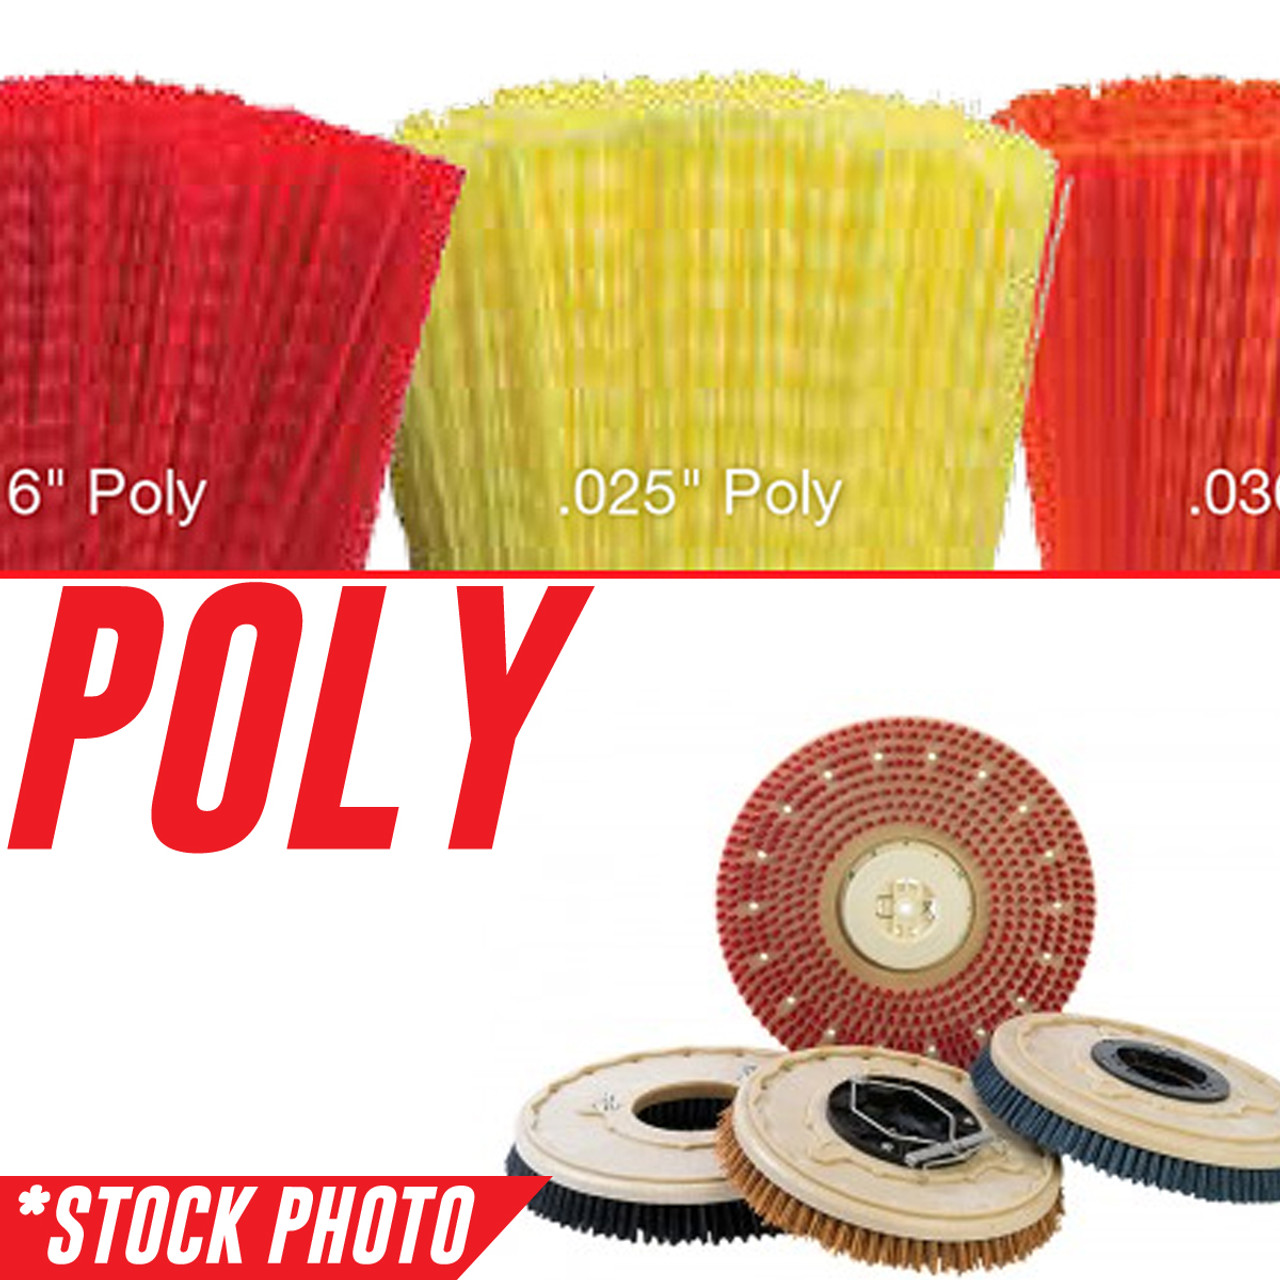 56505784: 16" Rotary Brush .028" Poly fits Various Advance-Nilfisk Models